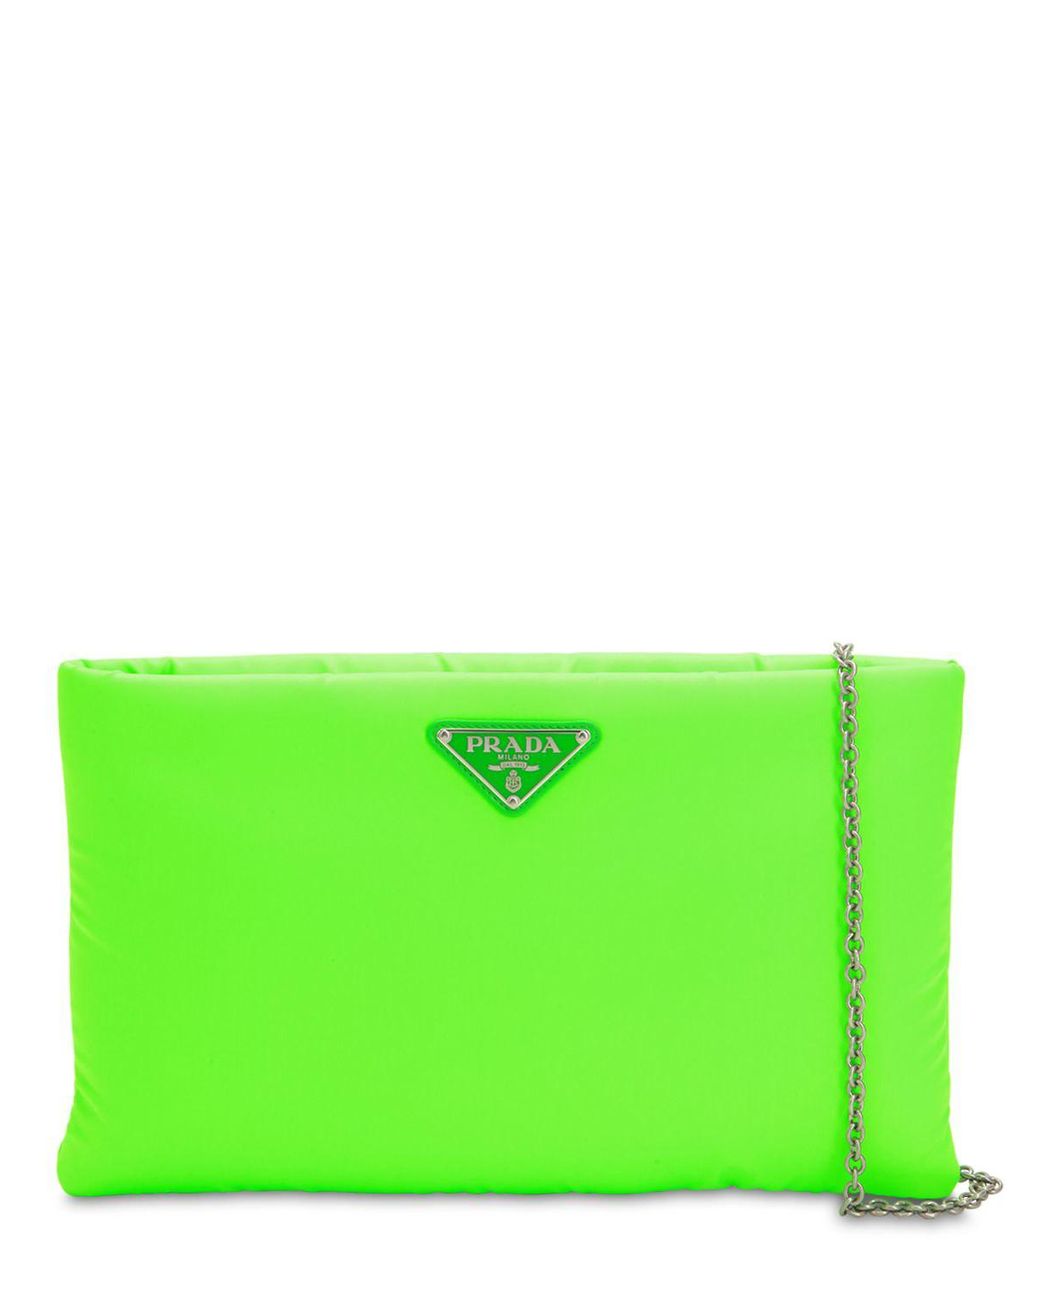 Prada Fluo Large Padded Nylon Clutch in Pink